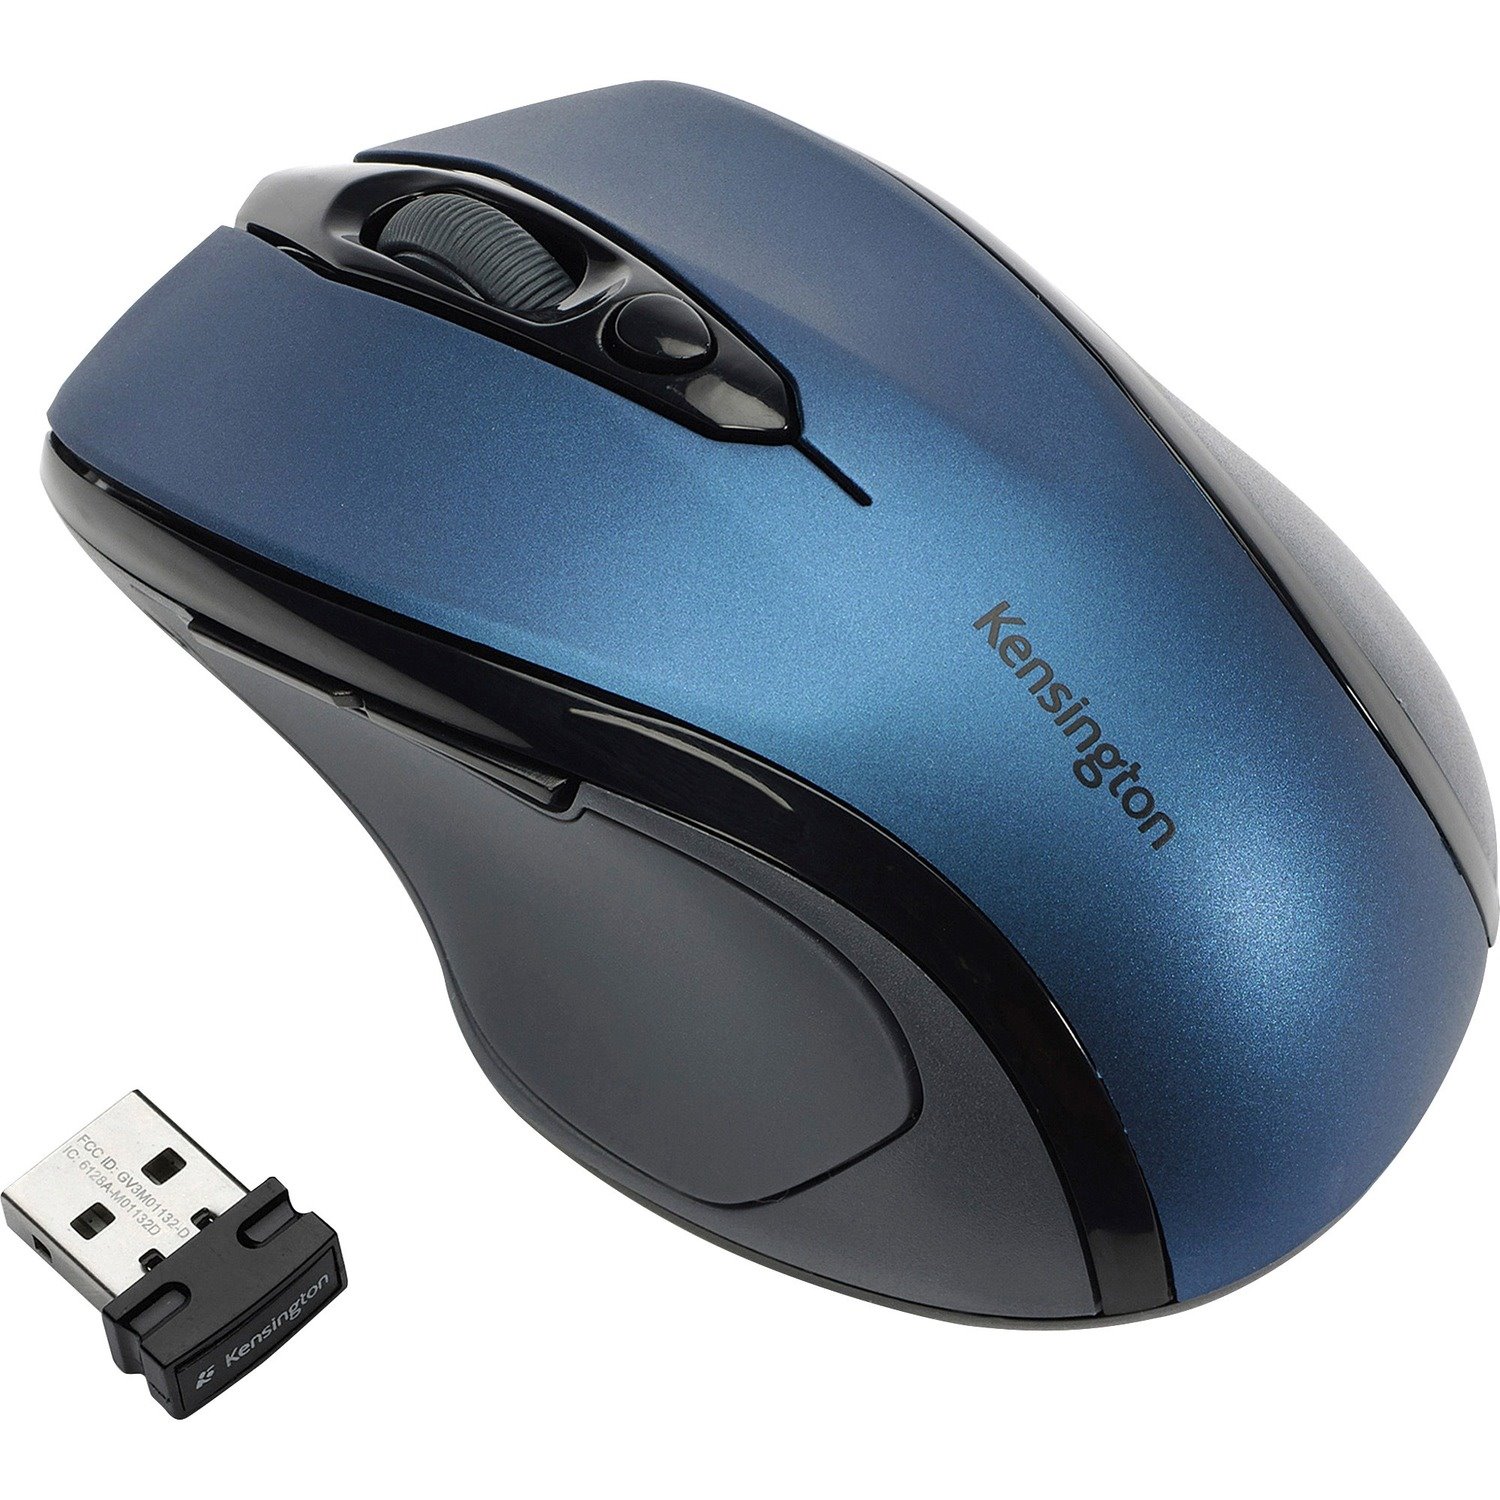 Kensington Pro Fit Mouse - Radio Frequency - USB - Optical - 3 Button(s) - Sapphire, Blue